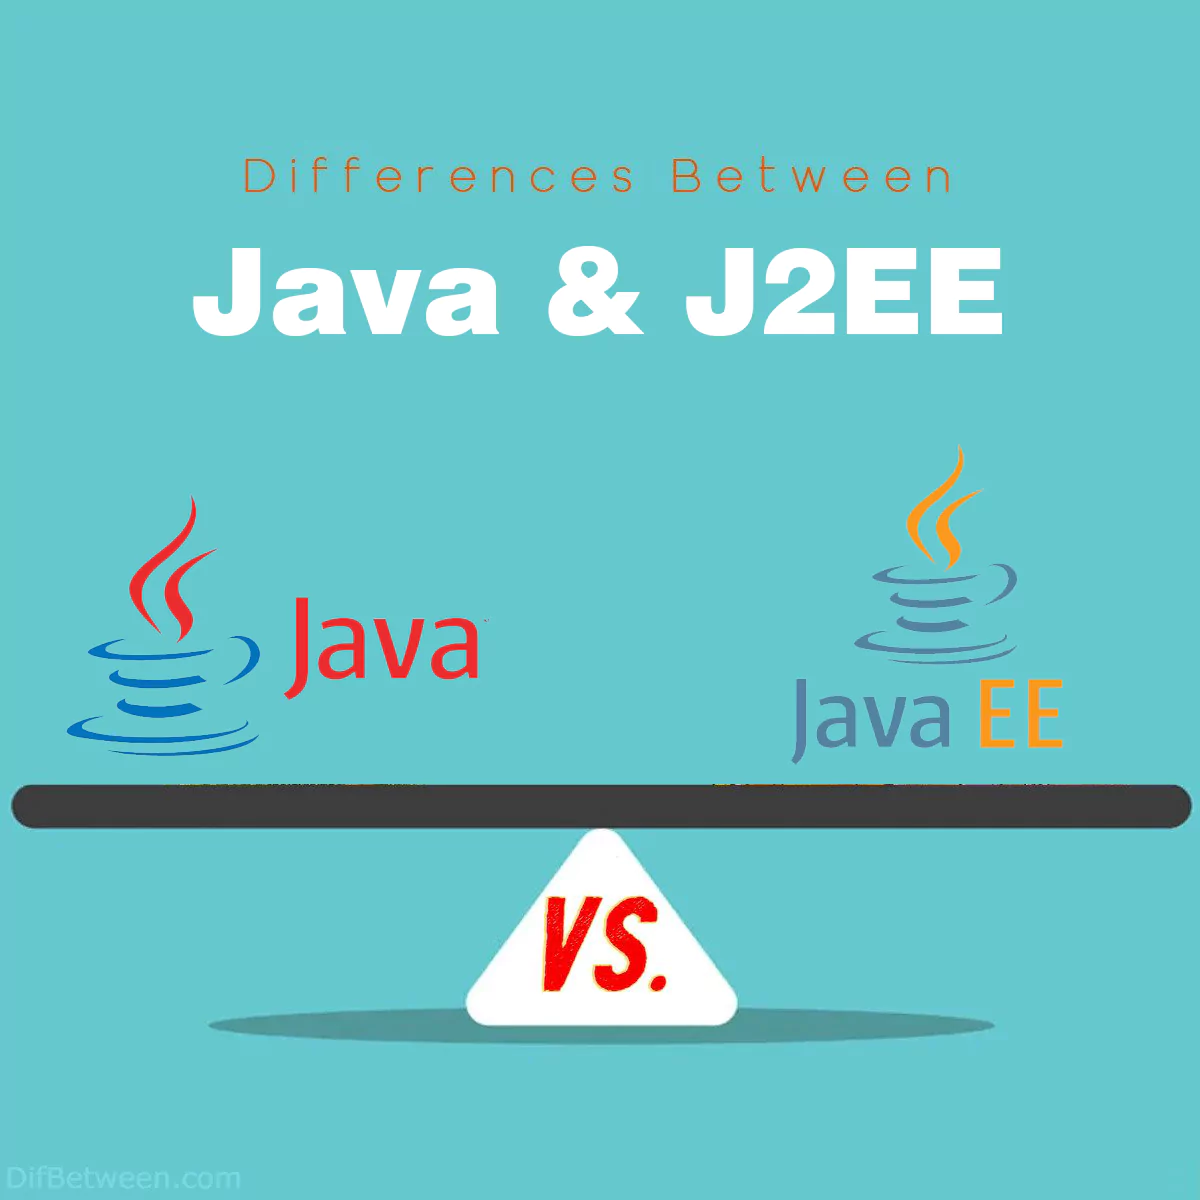 Differences Between Java and J2EE